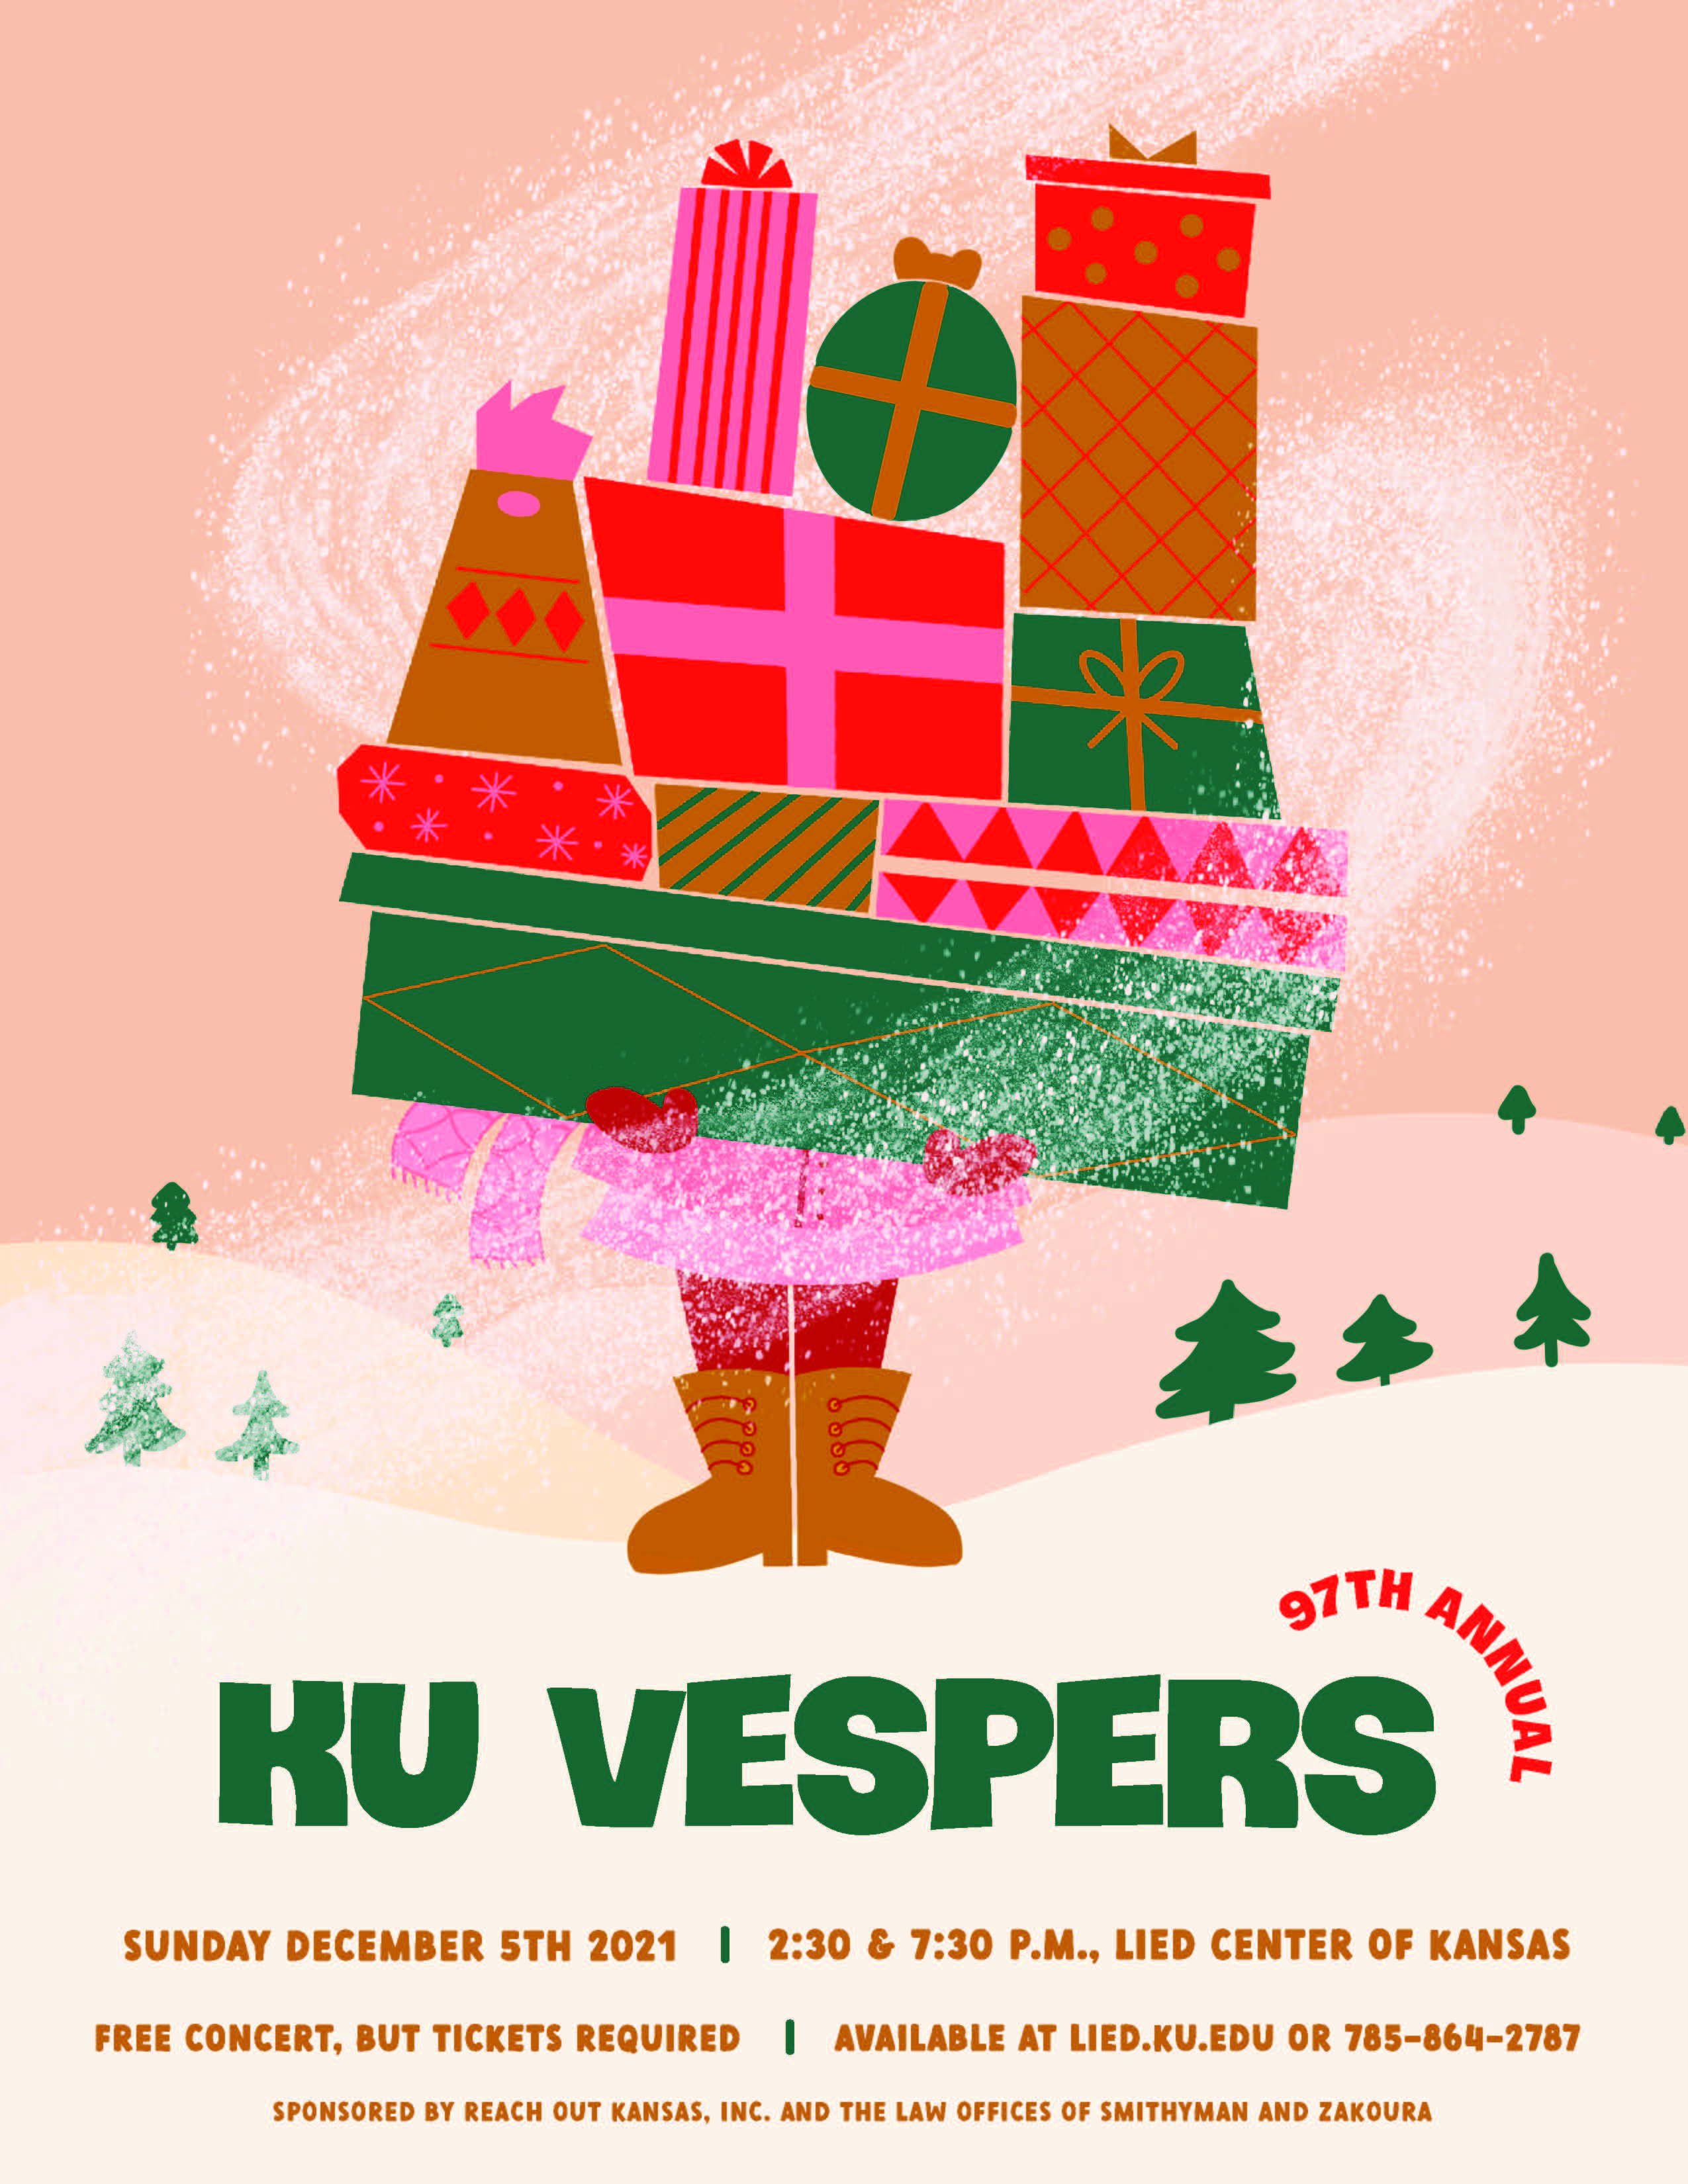 97th Annual KU Vespers event poster (event details in article)